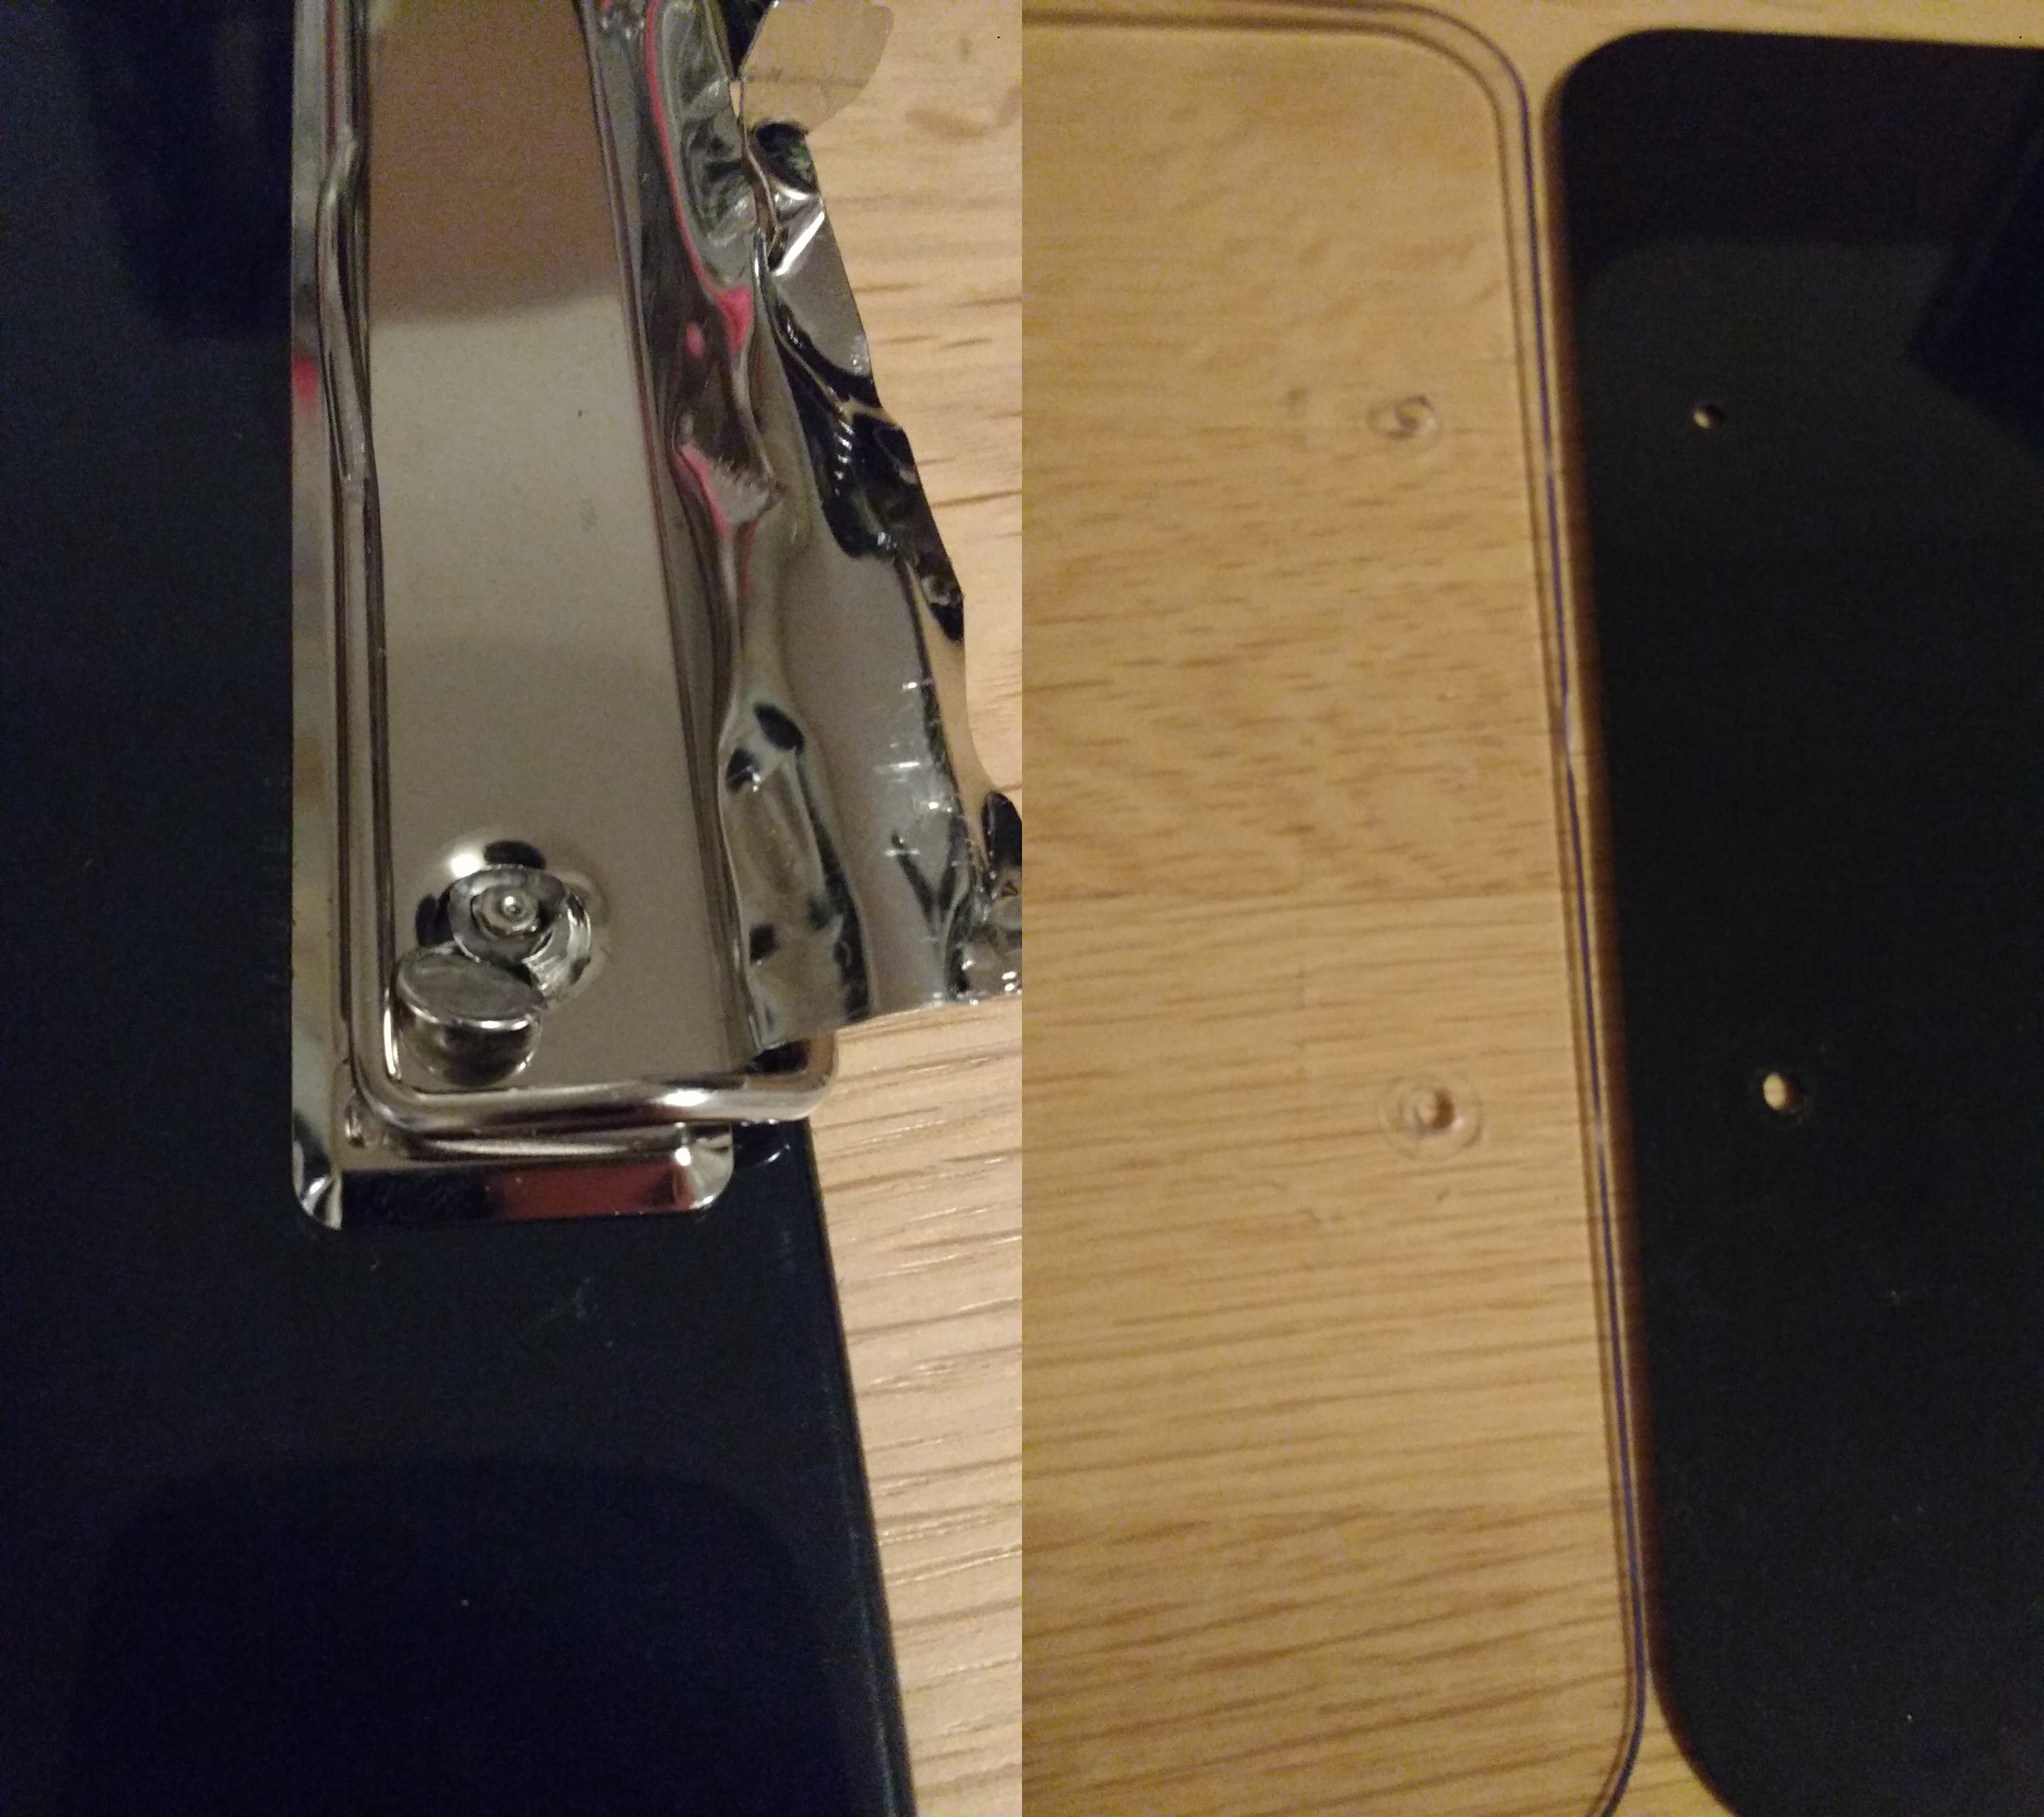 Plastic boards without clip